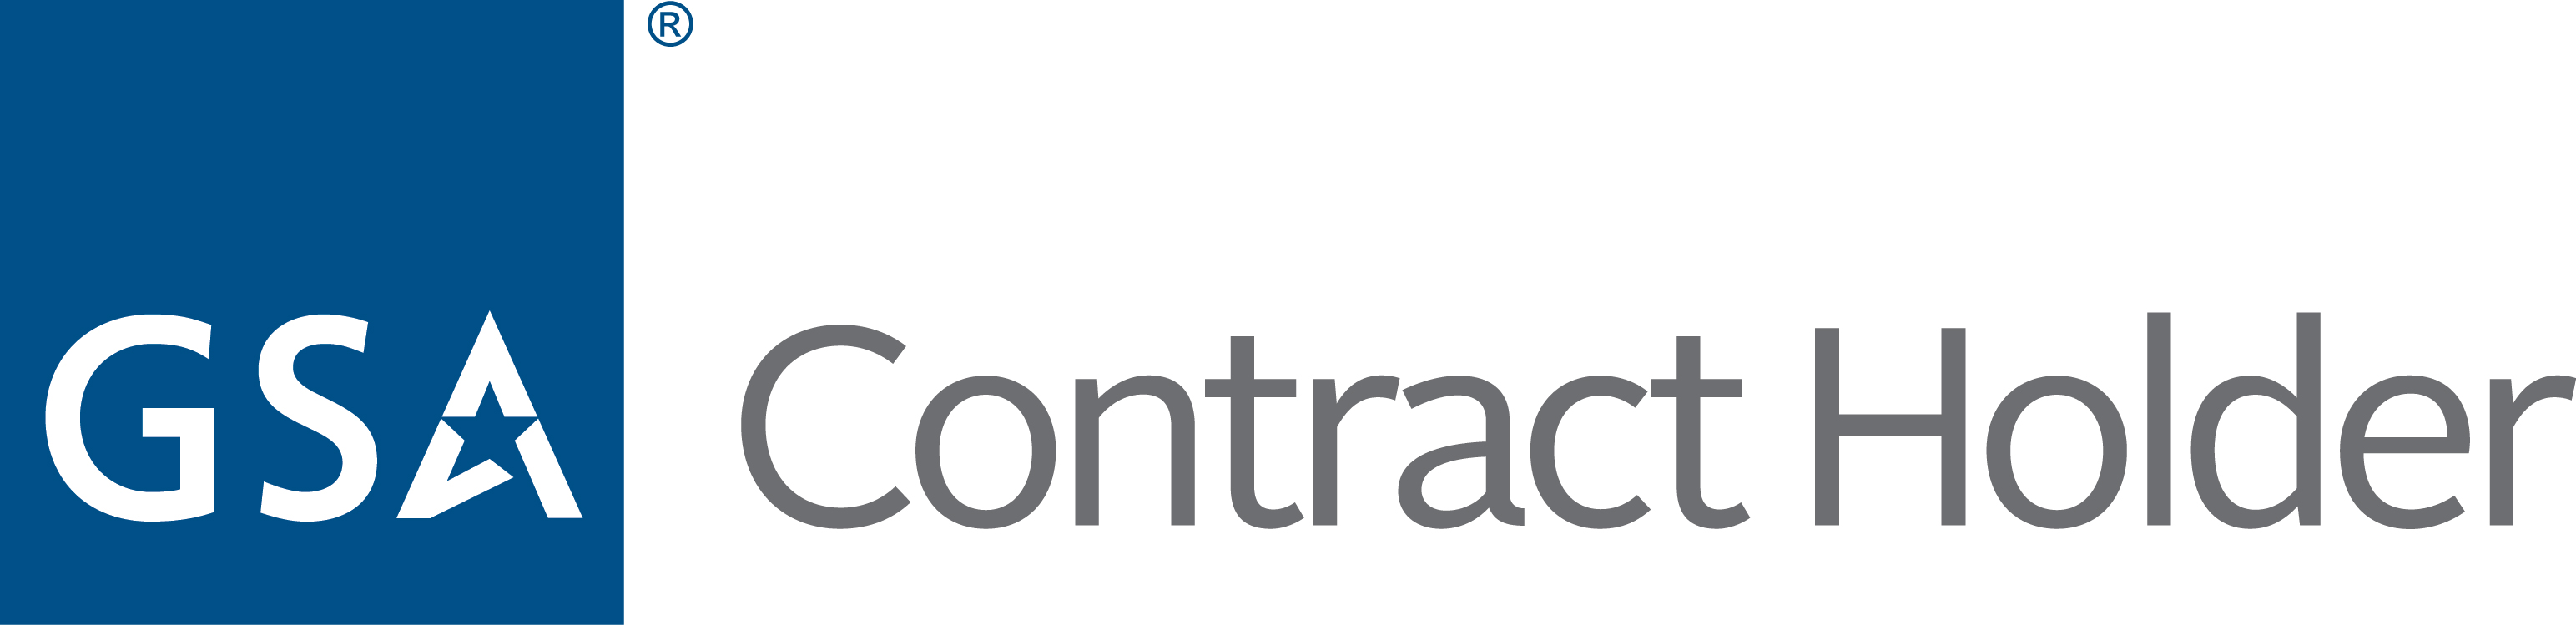 Midstate Industrial is a GSA Contract Holder